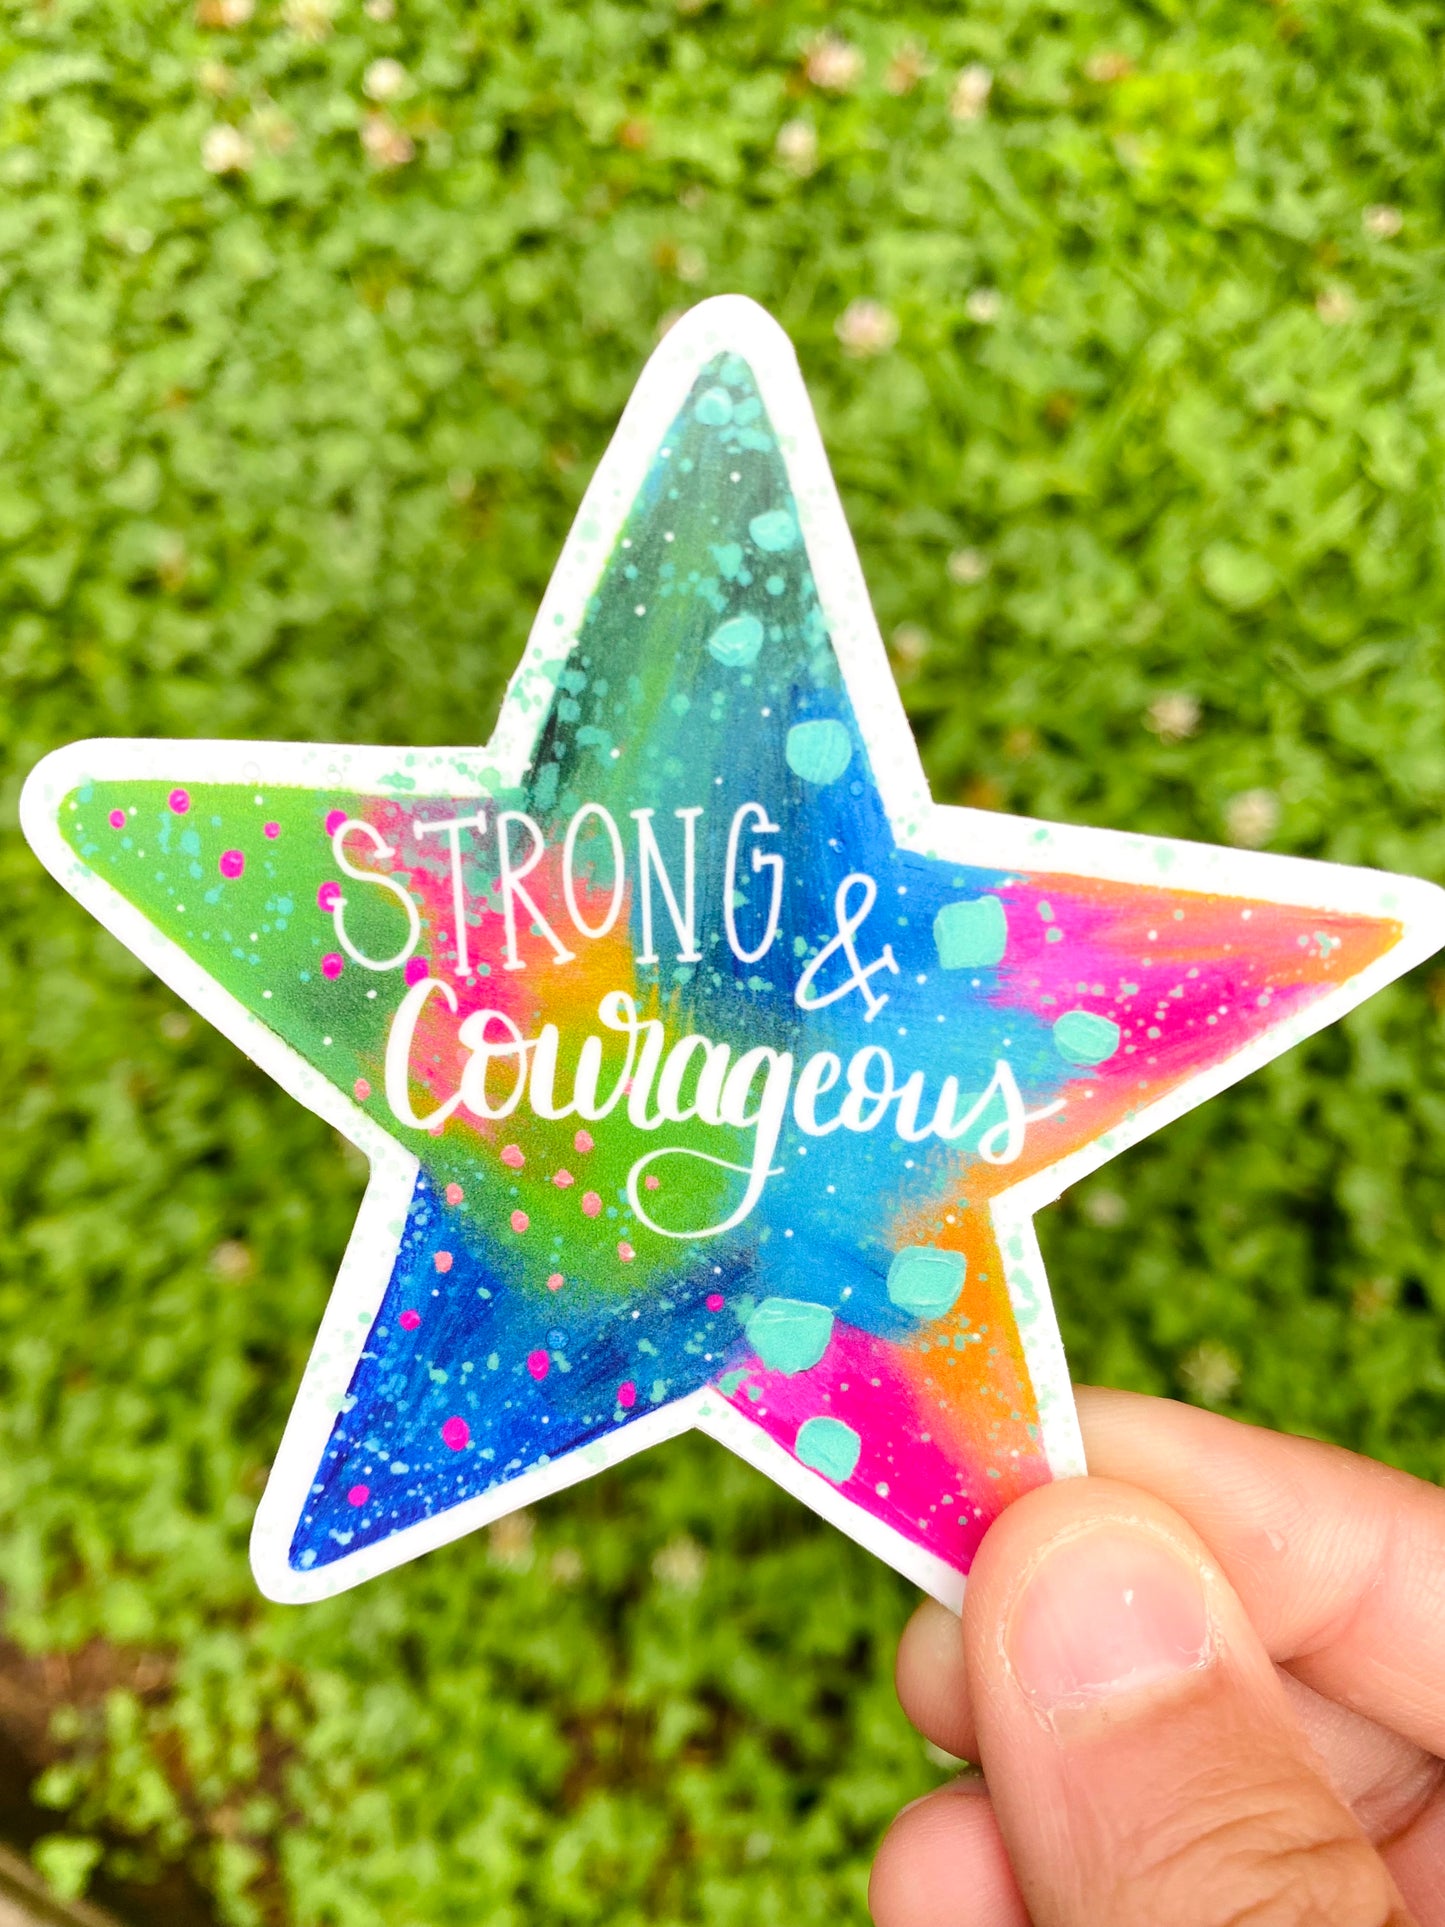 Strong and Courageous Star Vinyl Sticker - July 2021 Sticker of the Month